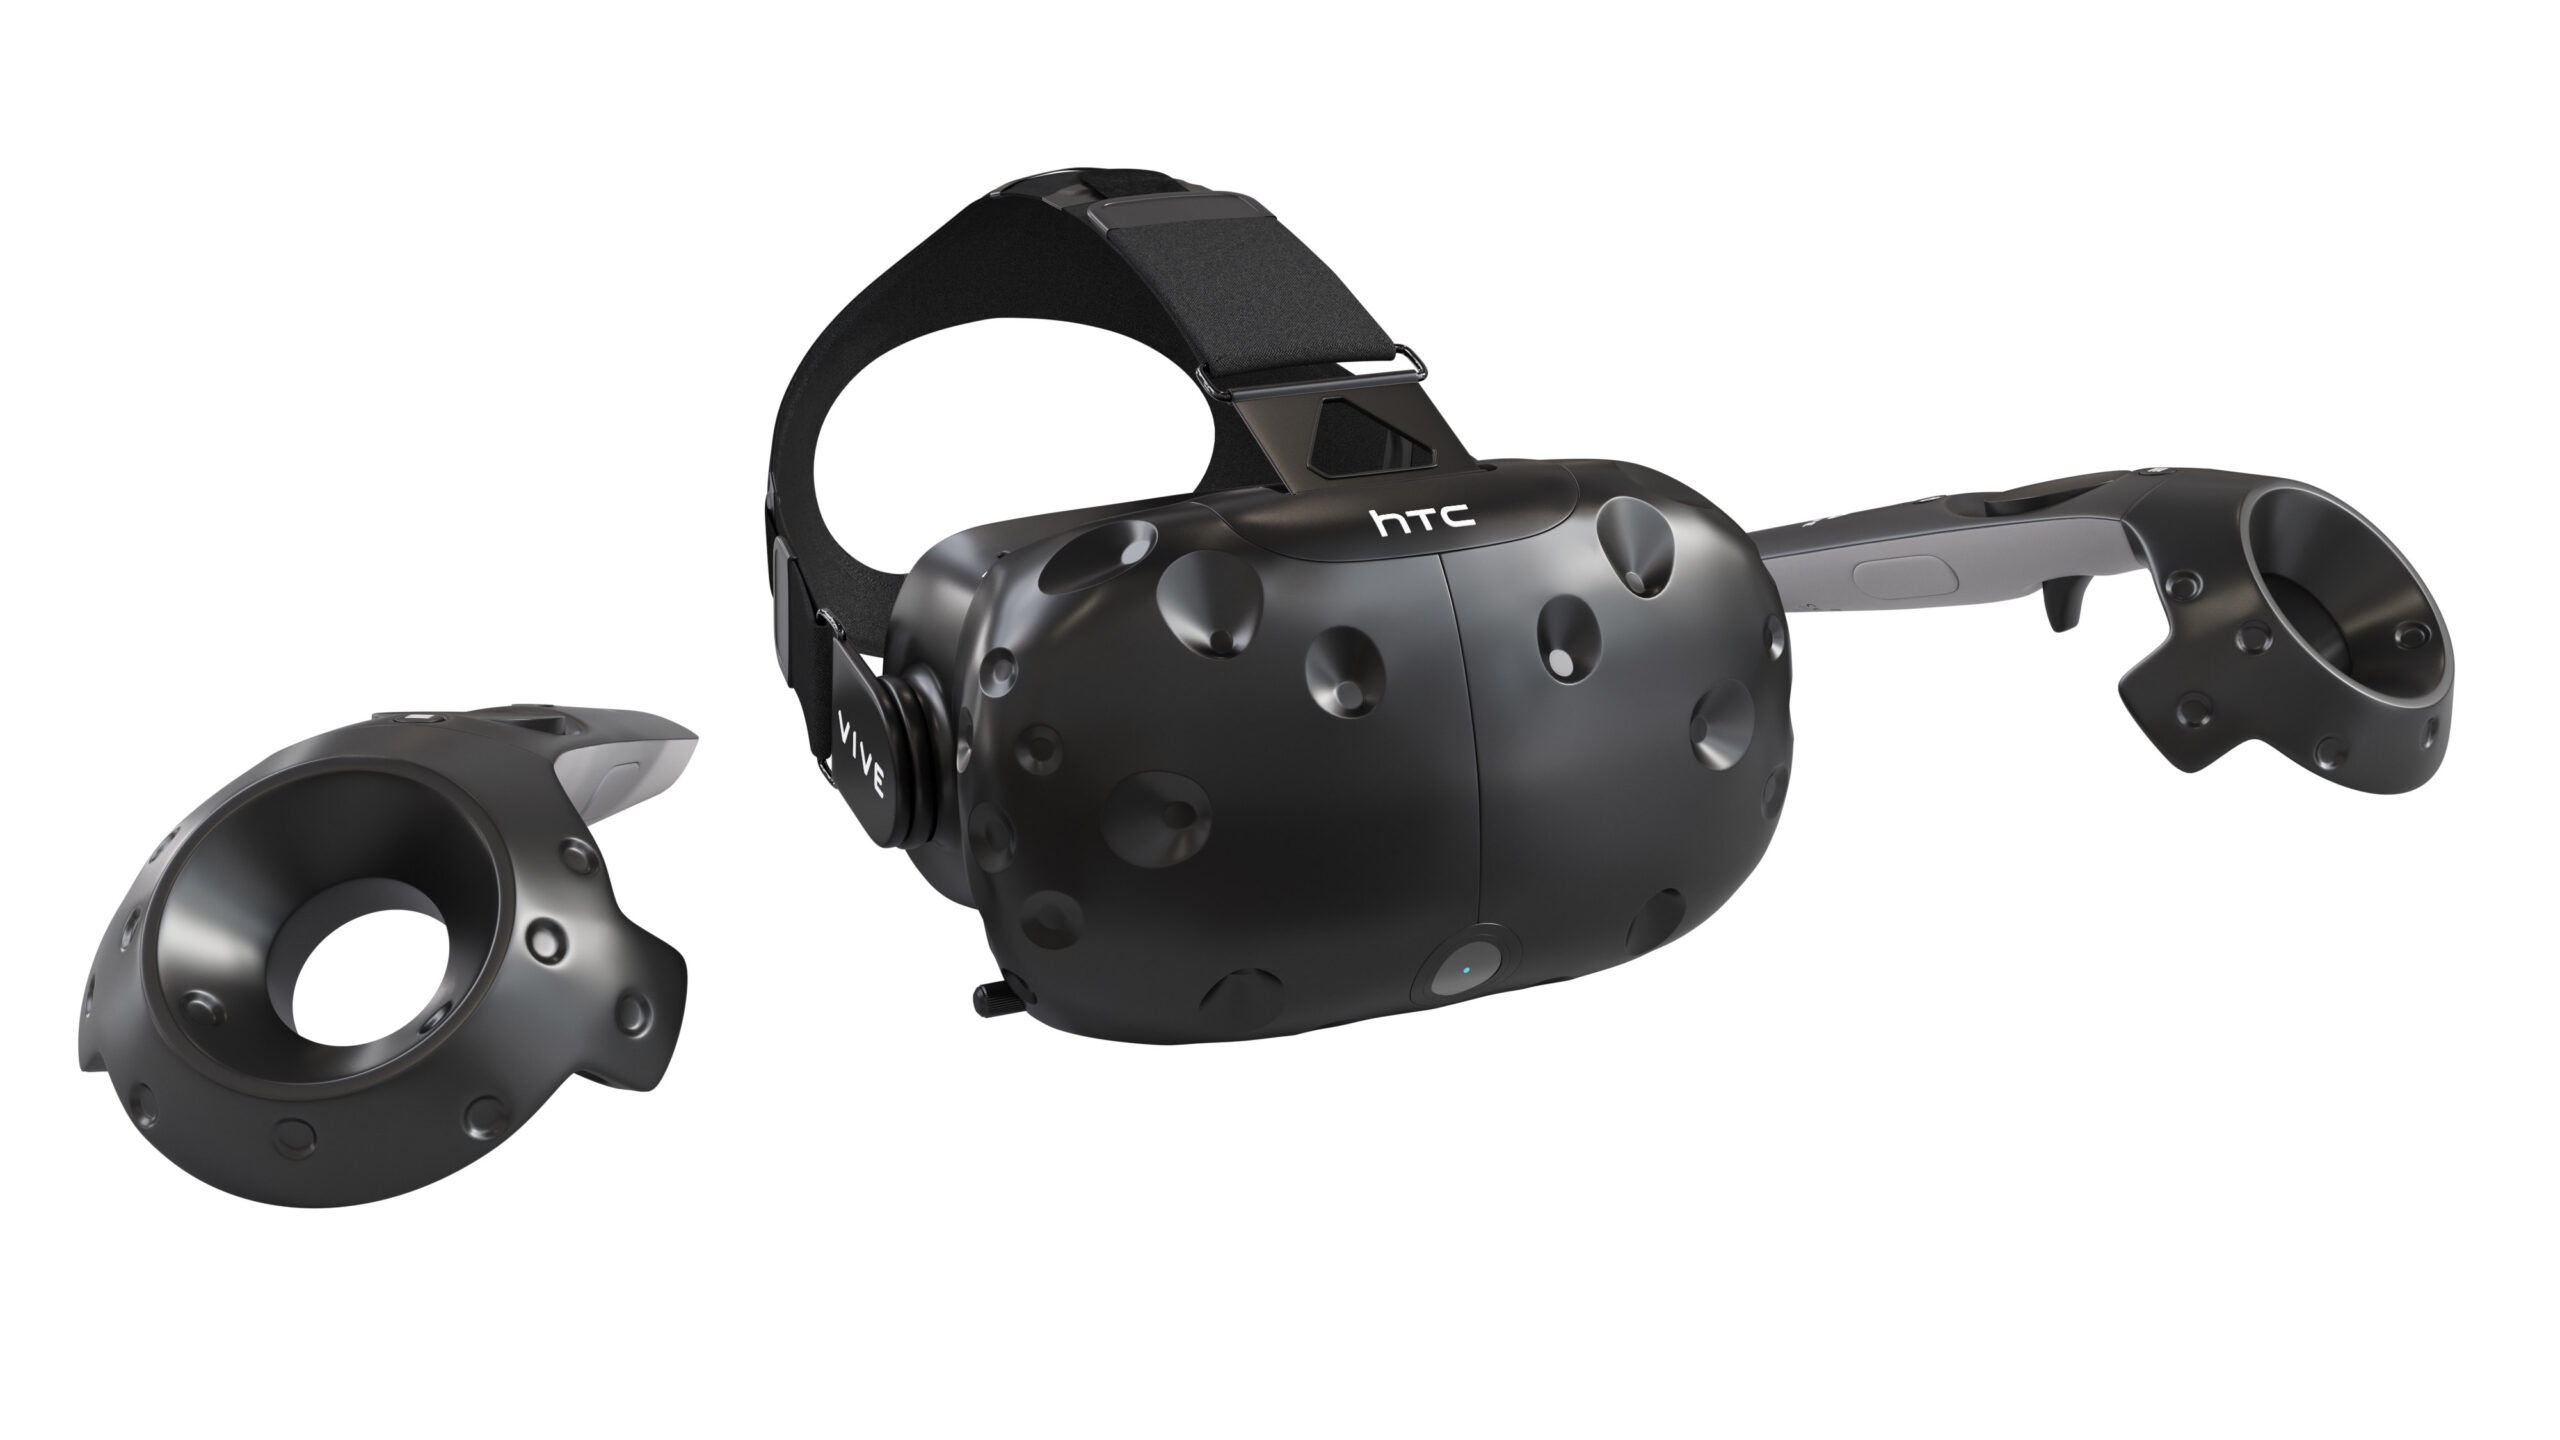 VR headset product rendering